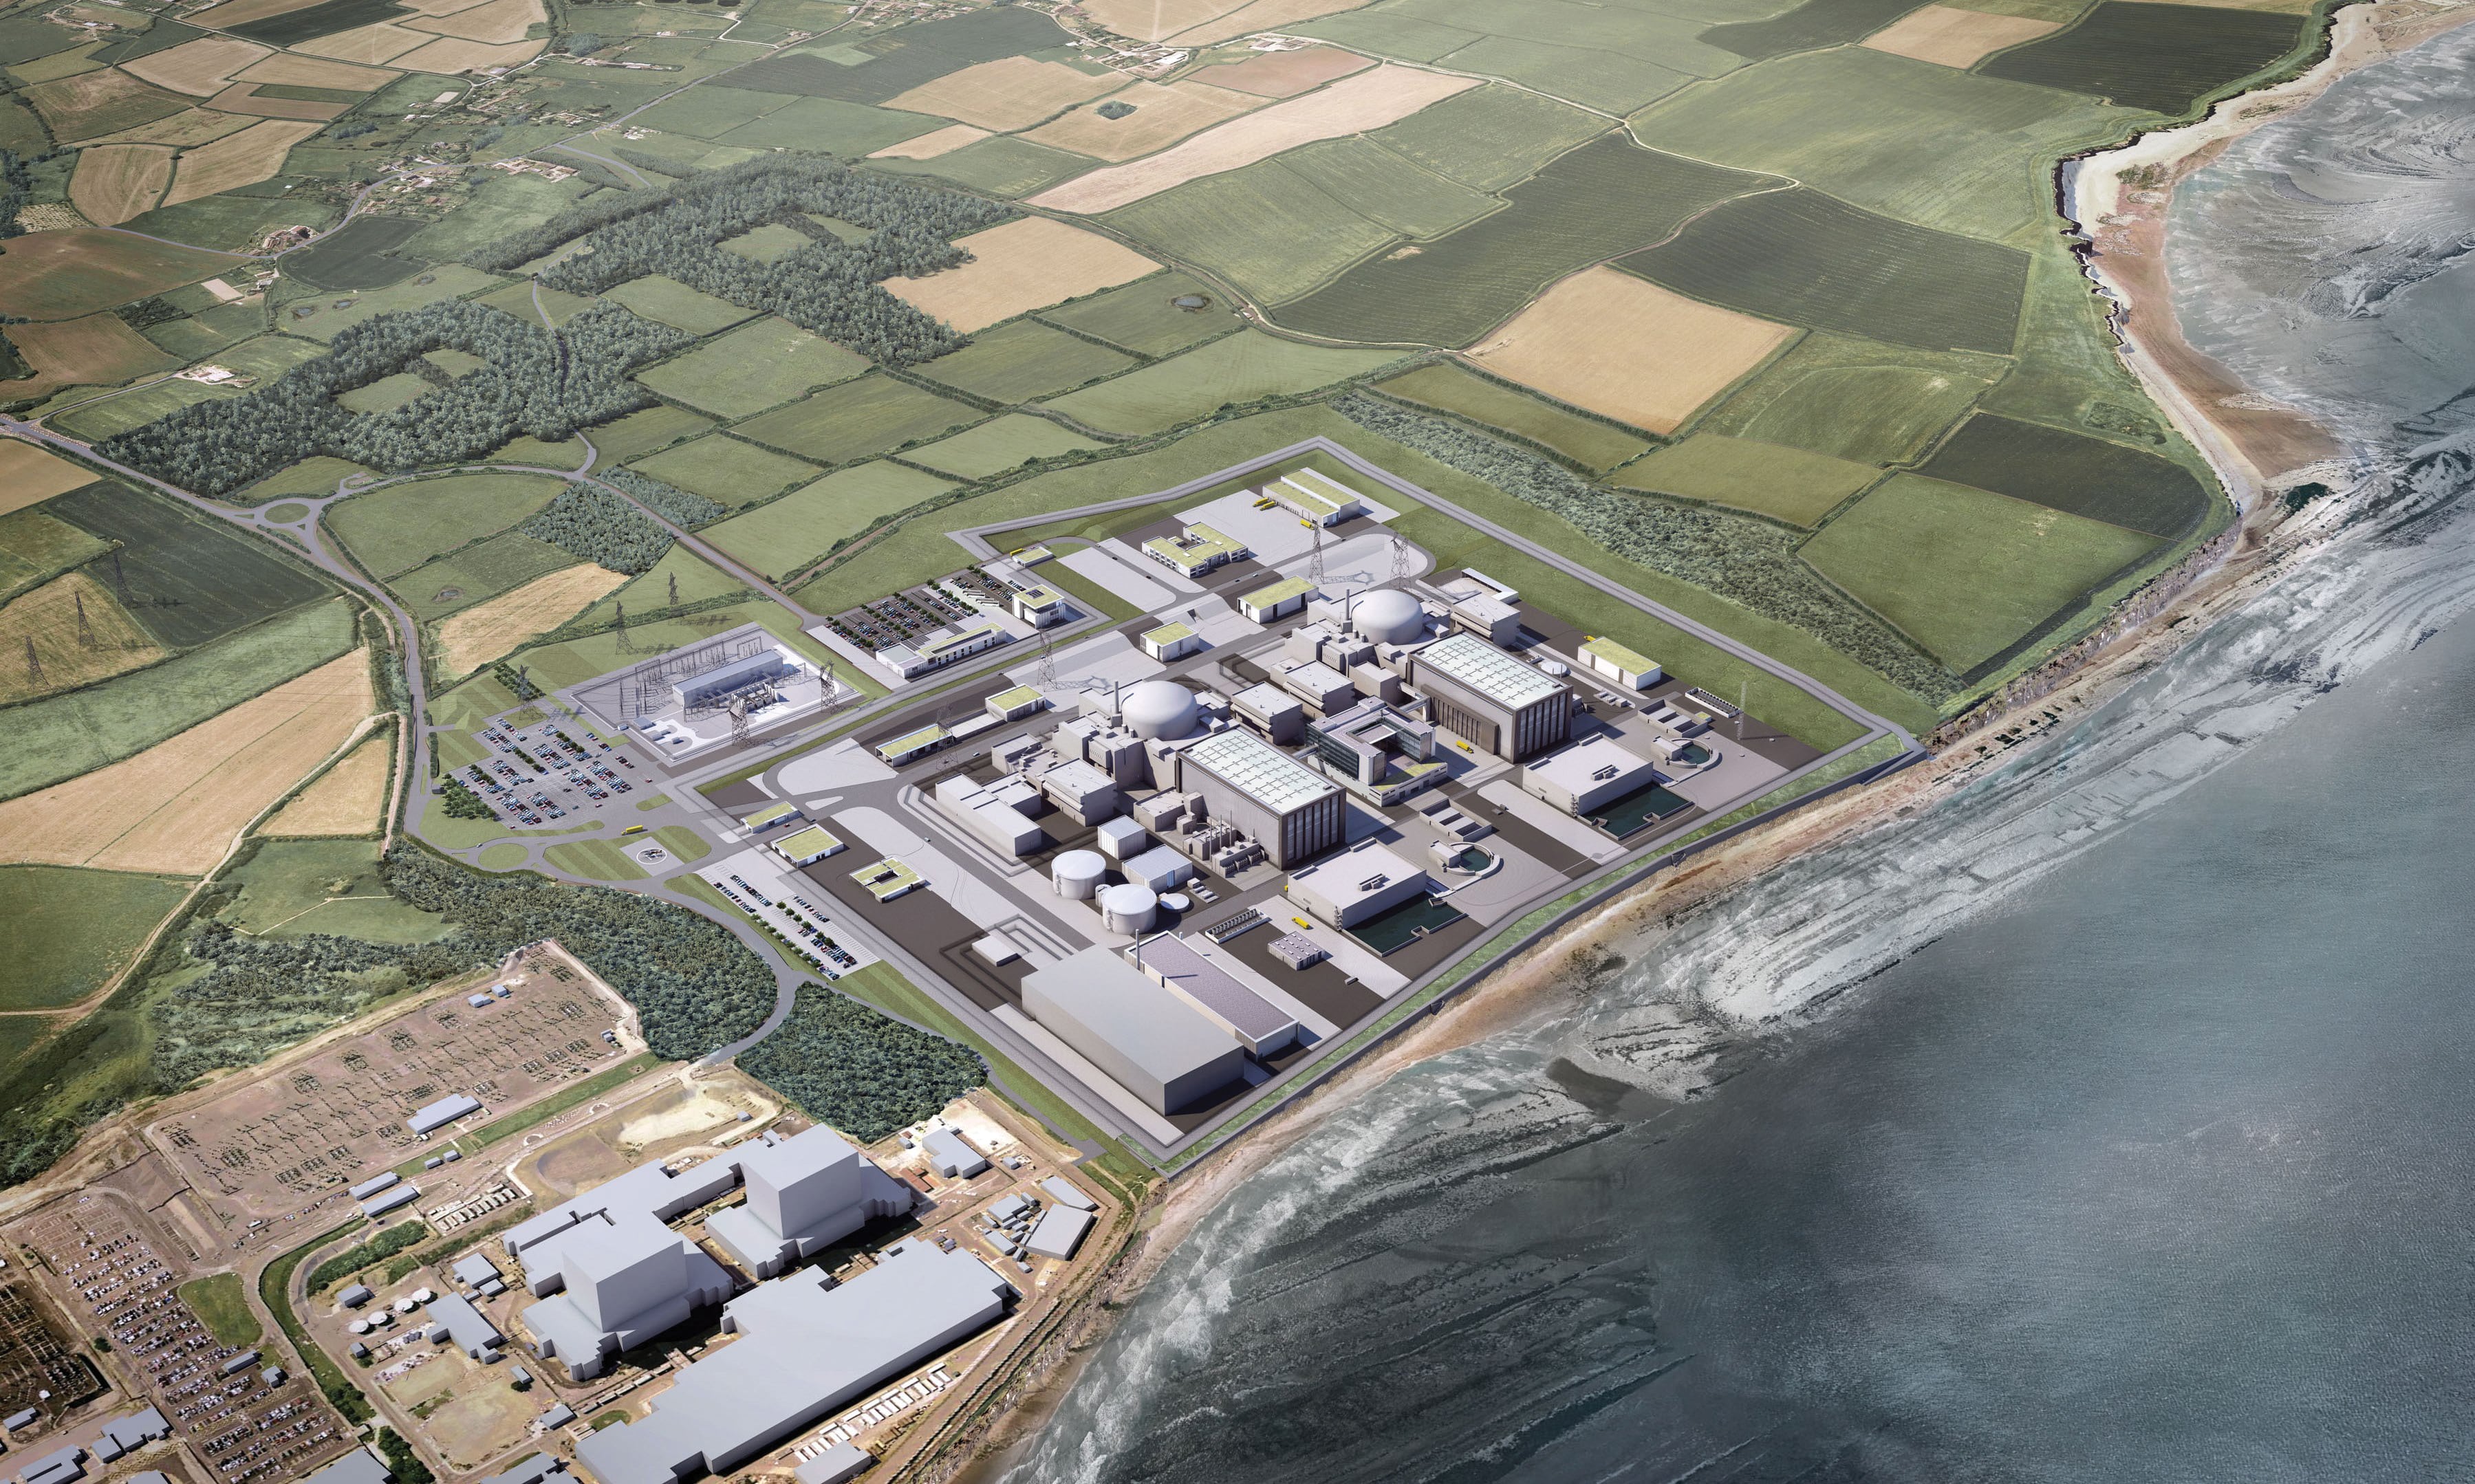 Hinkley Point C, Nuclear New Build Mega Project to Power